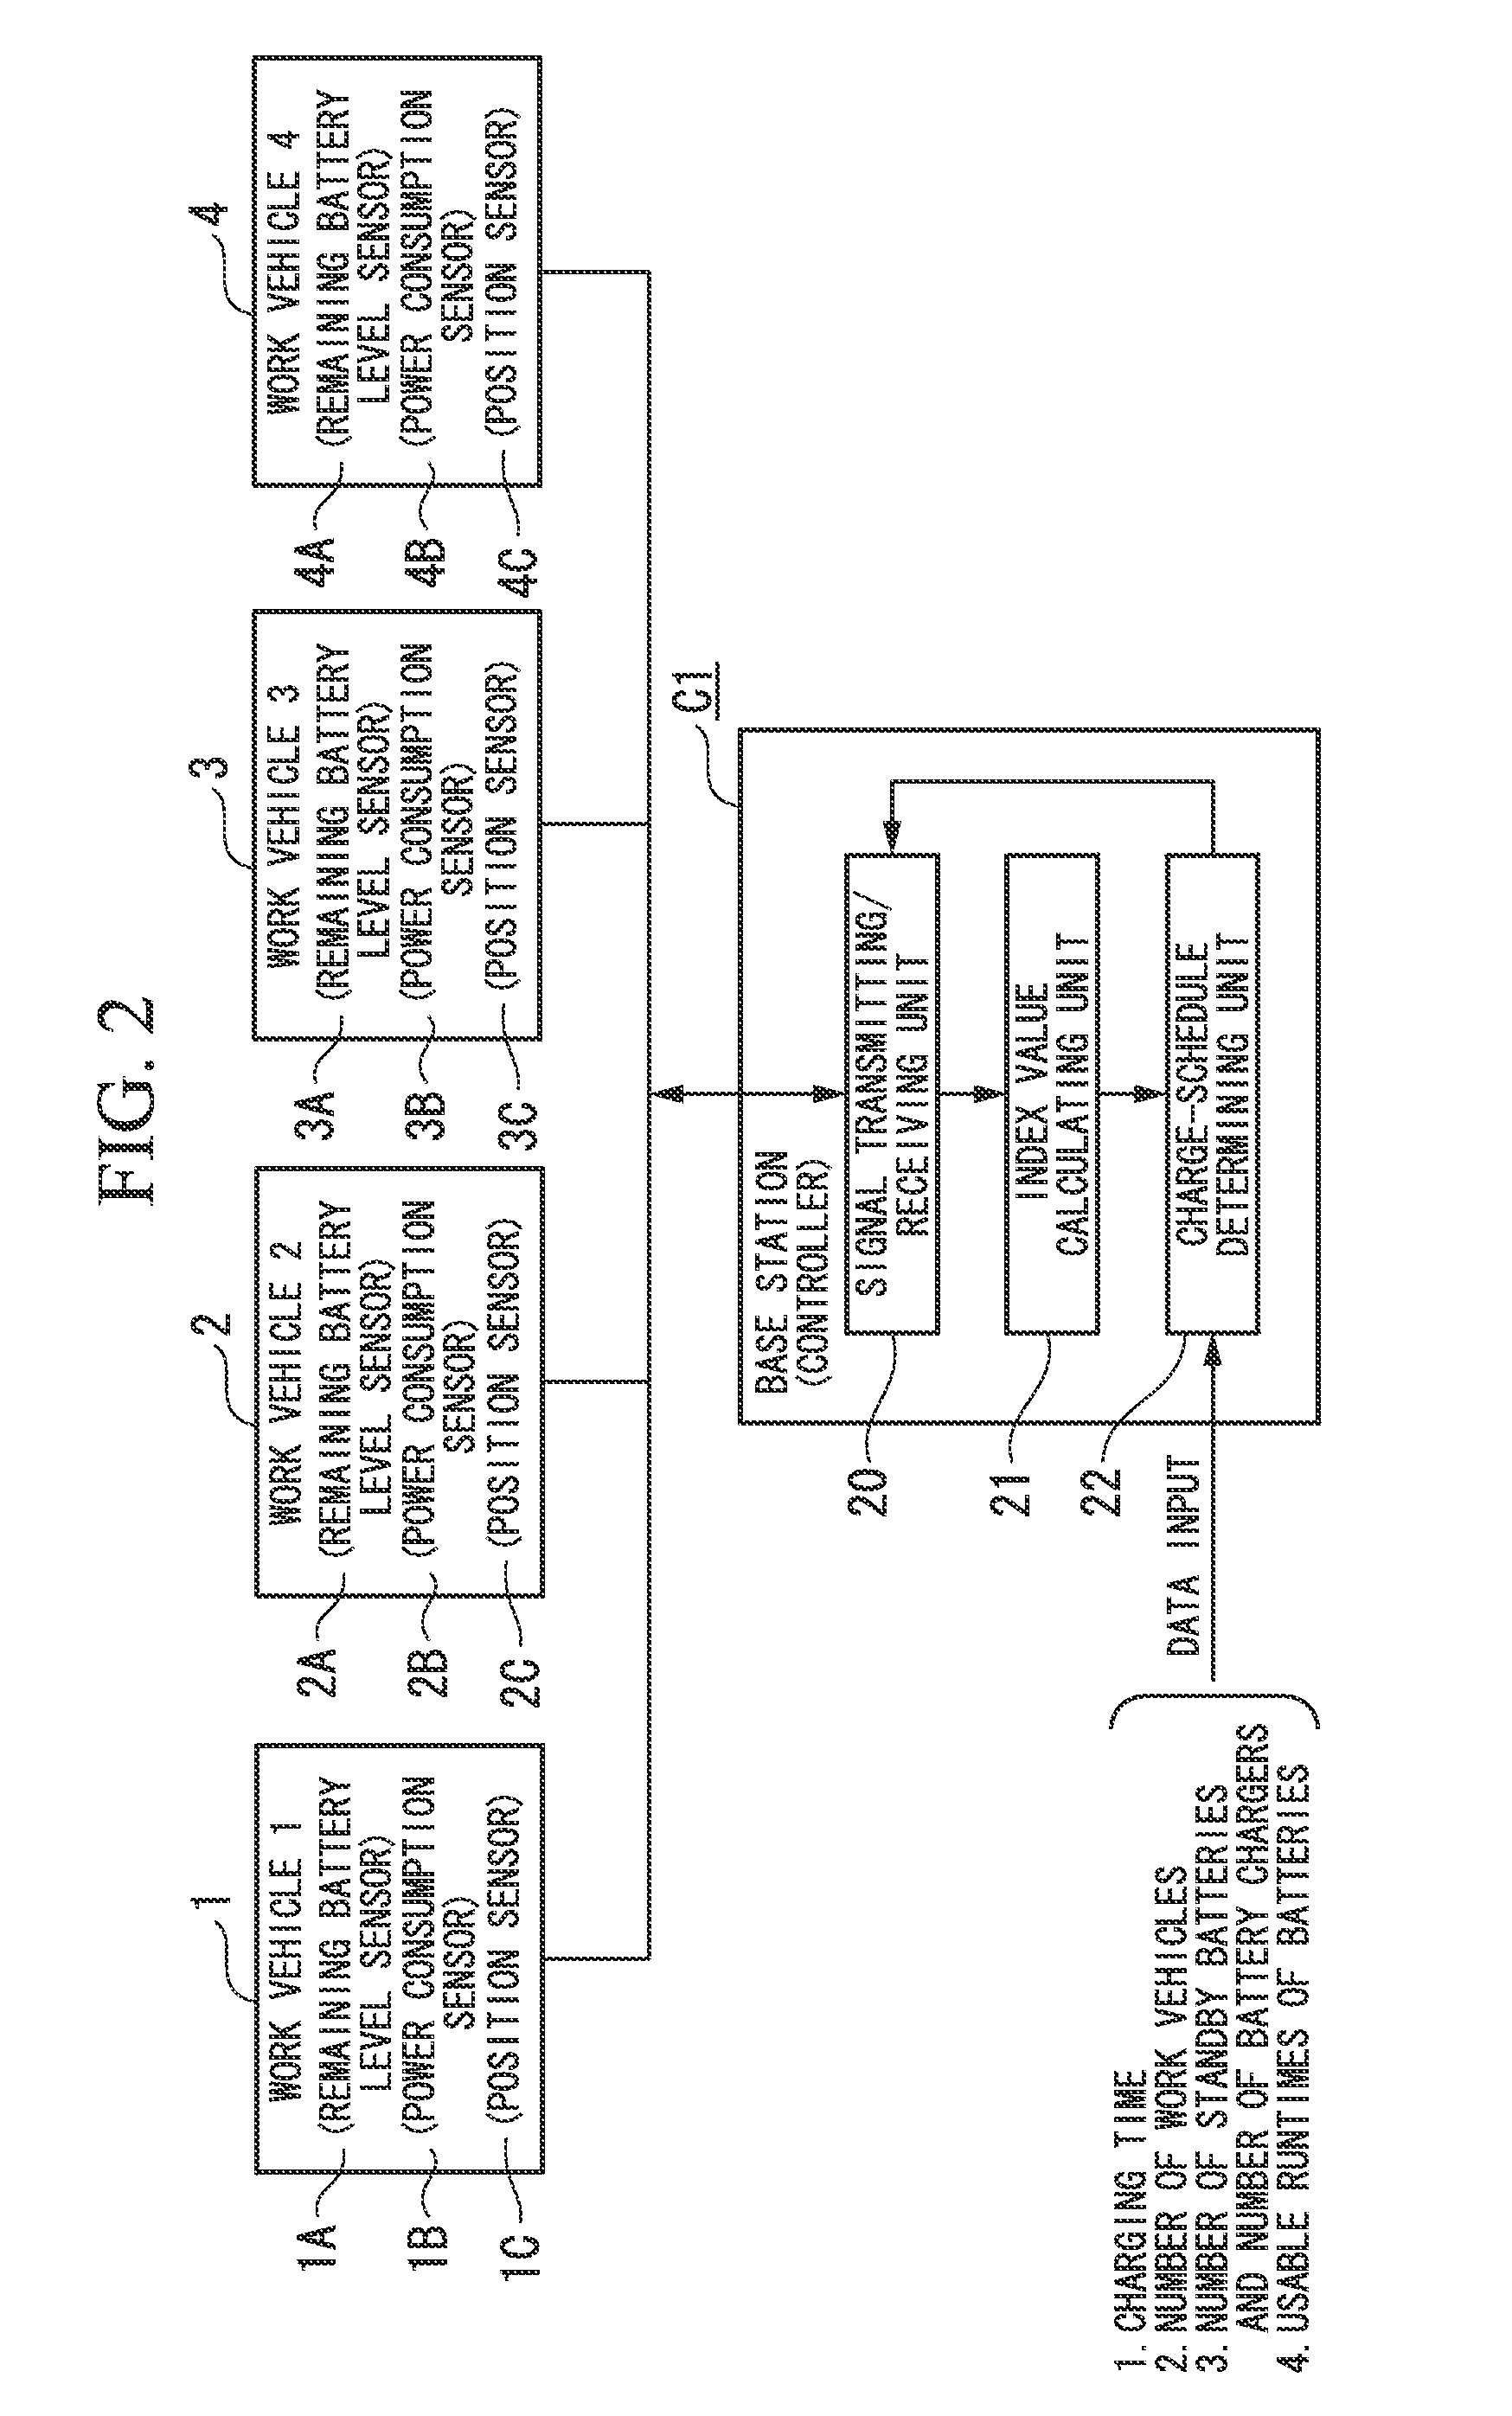 Management method for charging secondary batteries of work vehicles, and system for charging secondary batteries of work vehicles